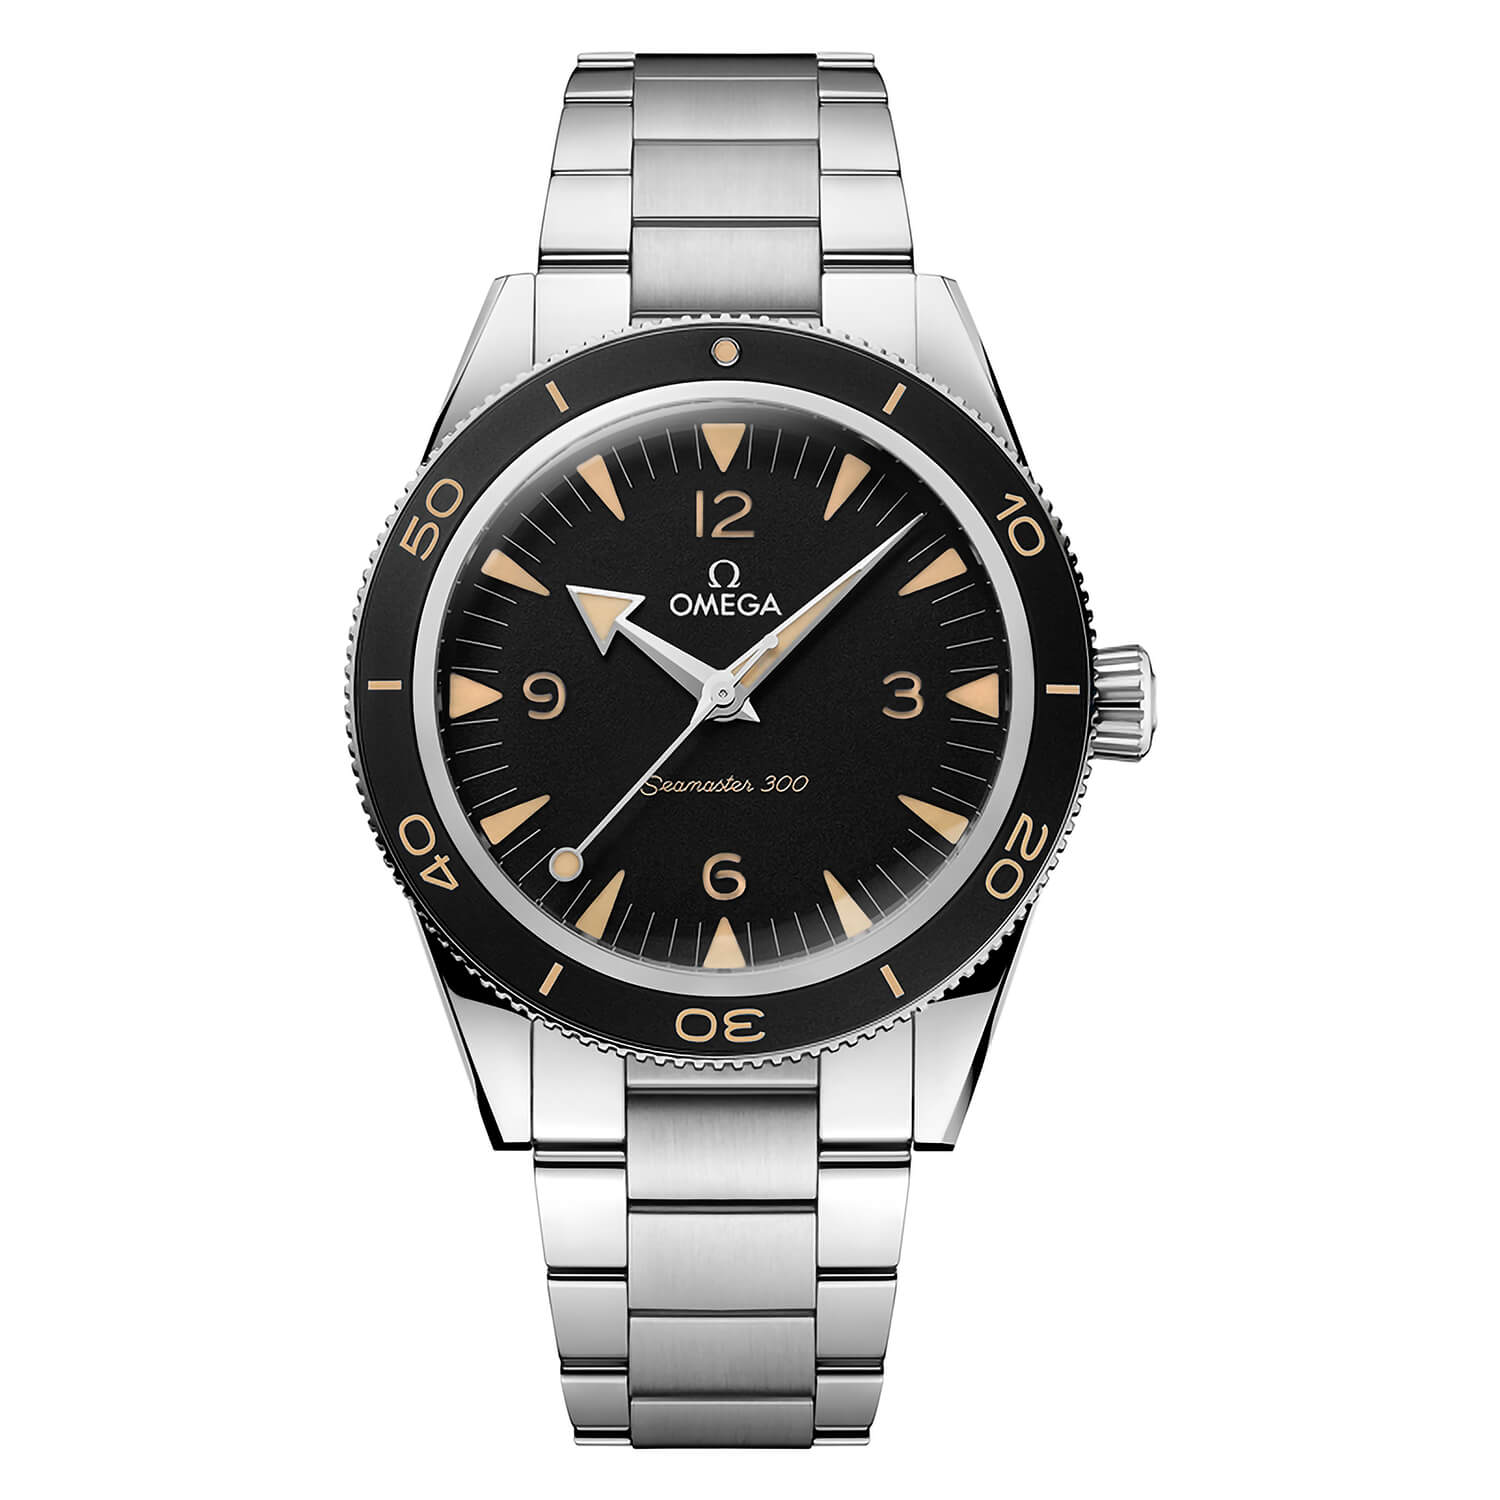 Photos - Wrist Watch Omega Seamaster 300 Co-Axial Master Chronometer 41mm Dial Steel Case Watch 